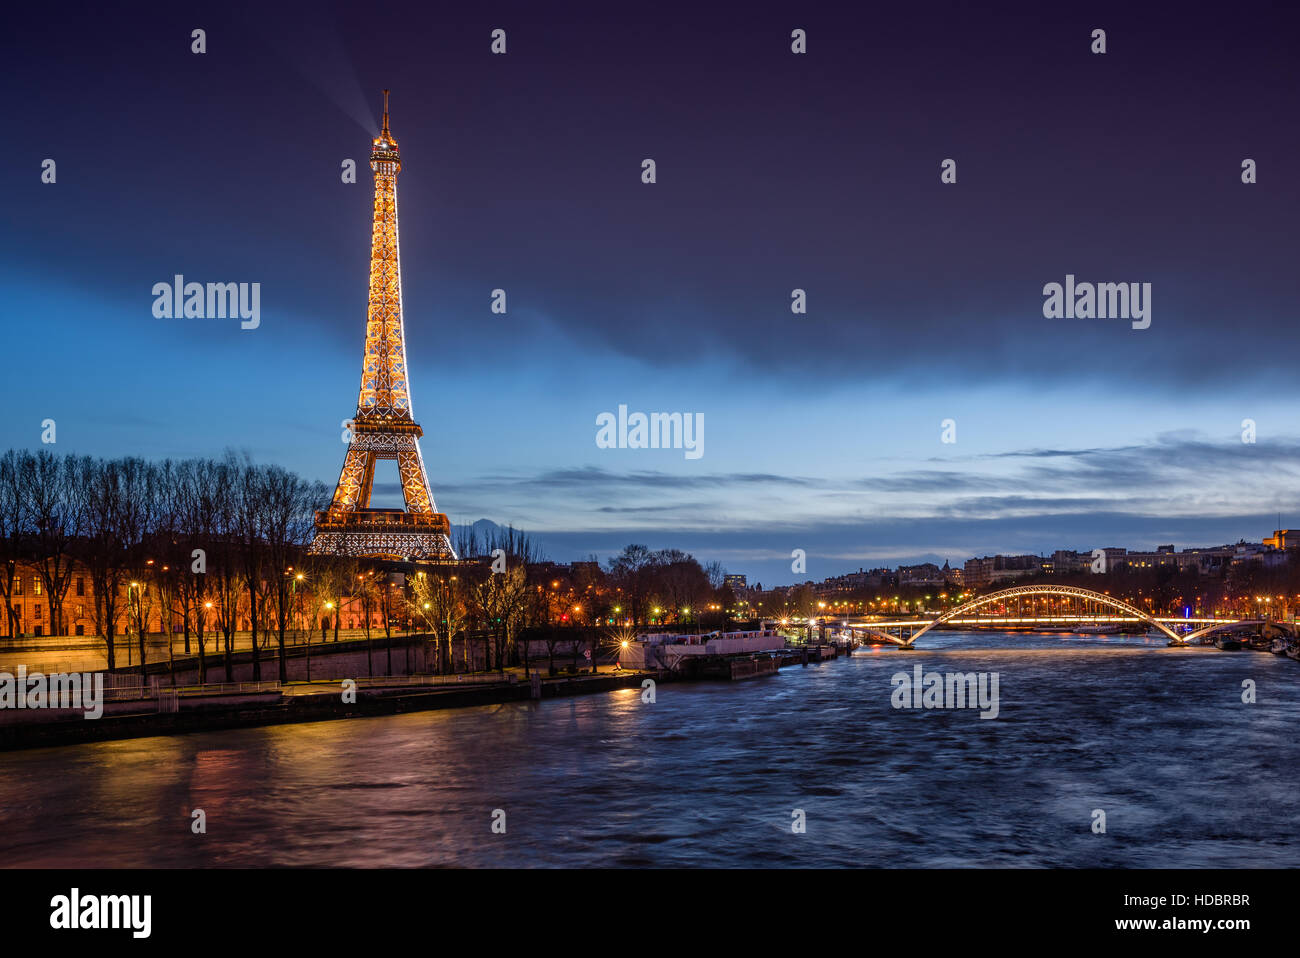 The Eiffel Tower illuminated at twilight with banks of the Seine River and the Debilly Footbridge. Paris, France Stock Photo